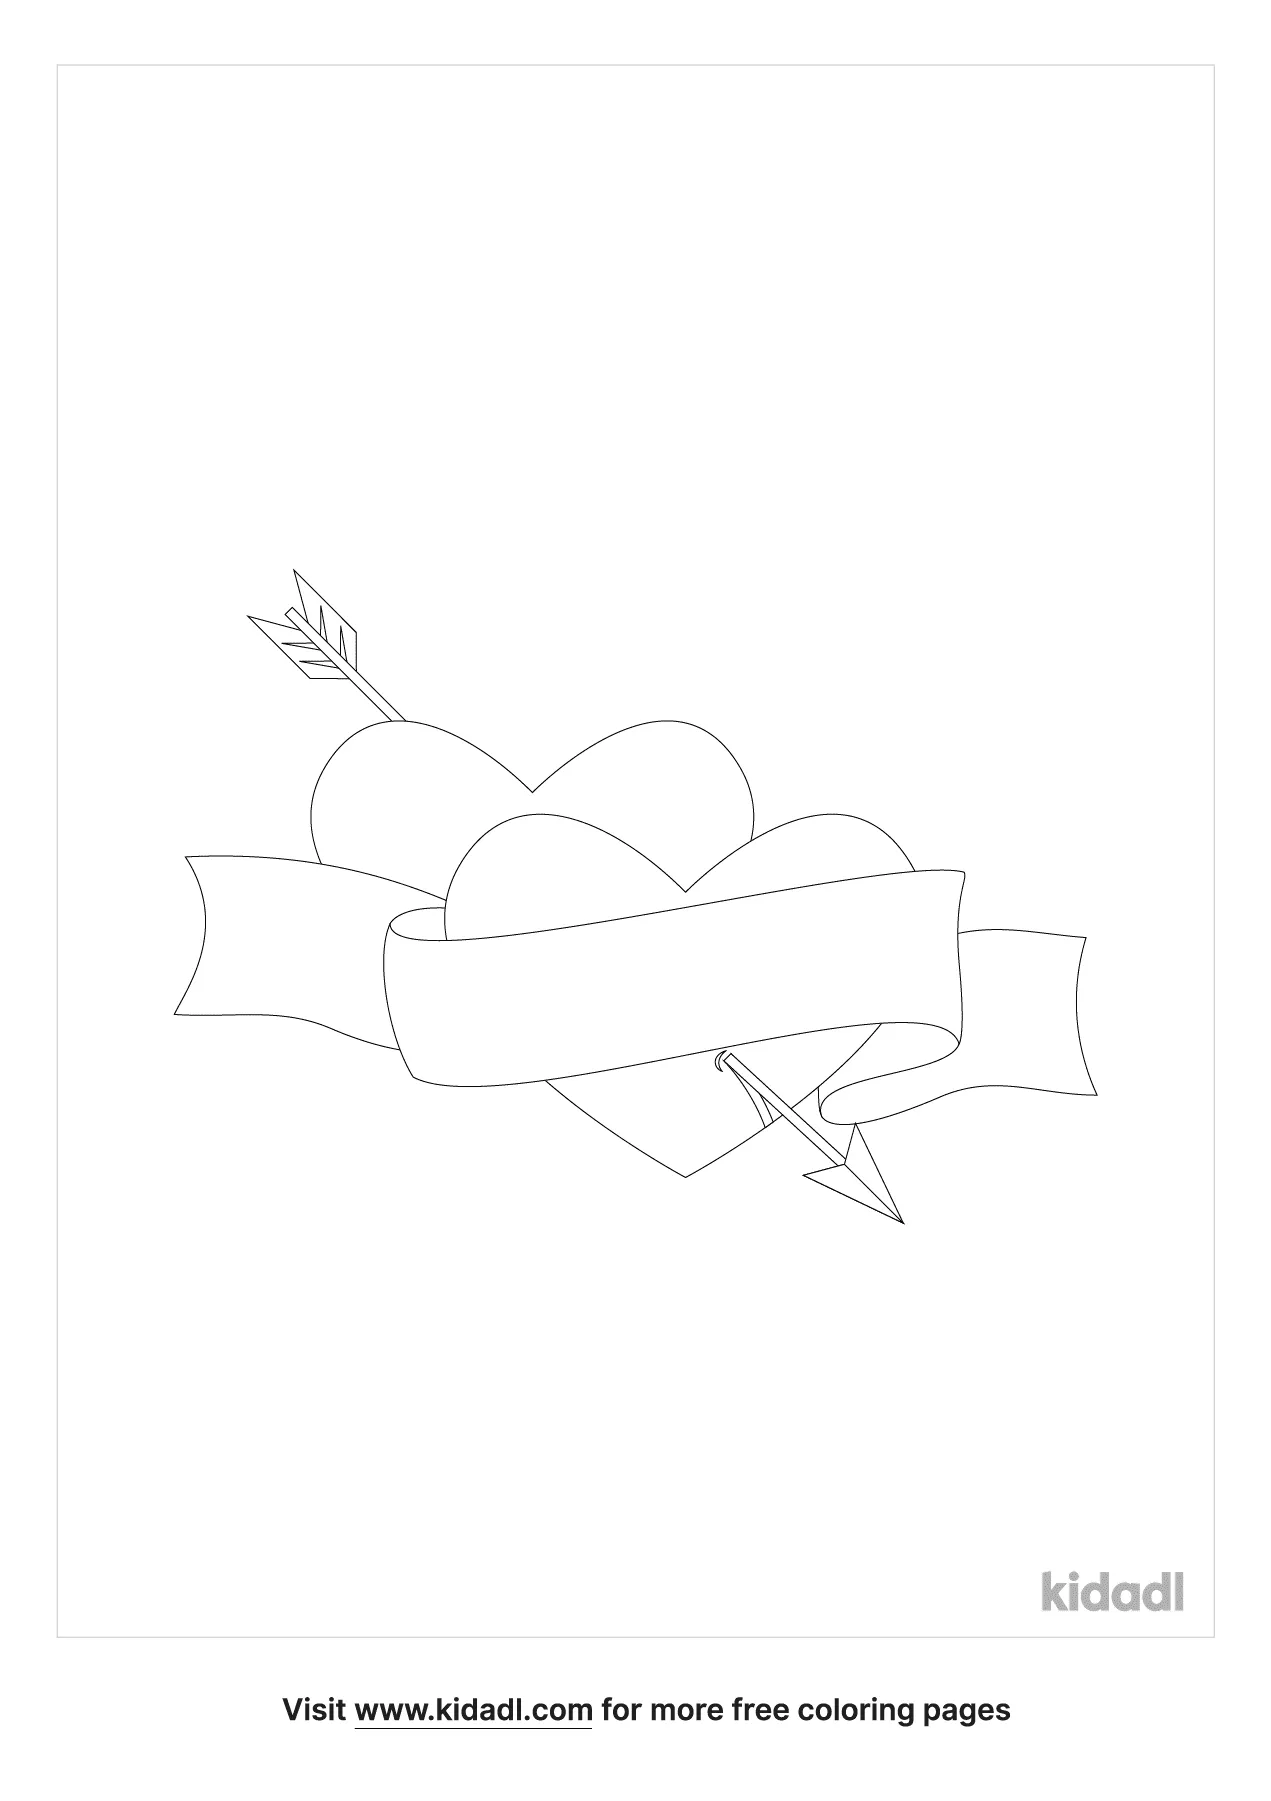 Two Hearts With An Arrow Coloring Page